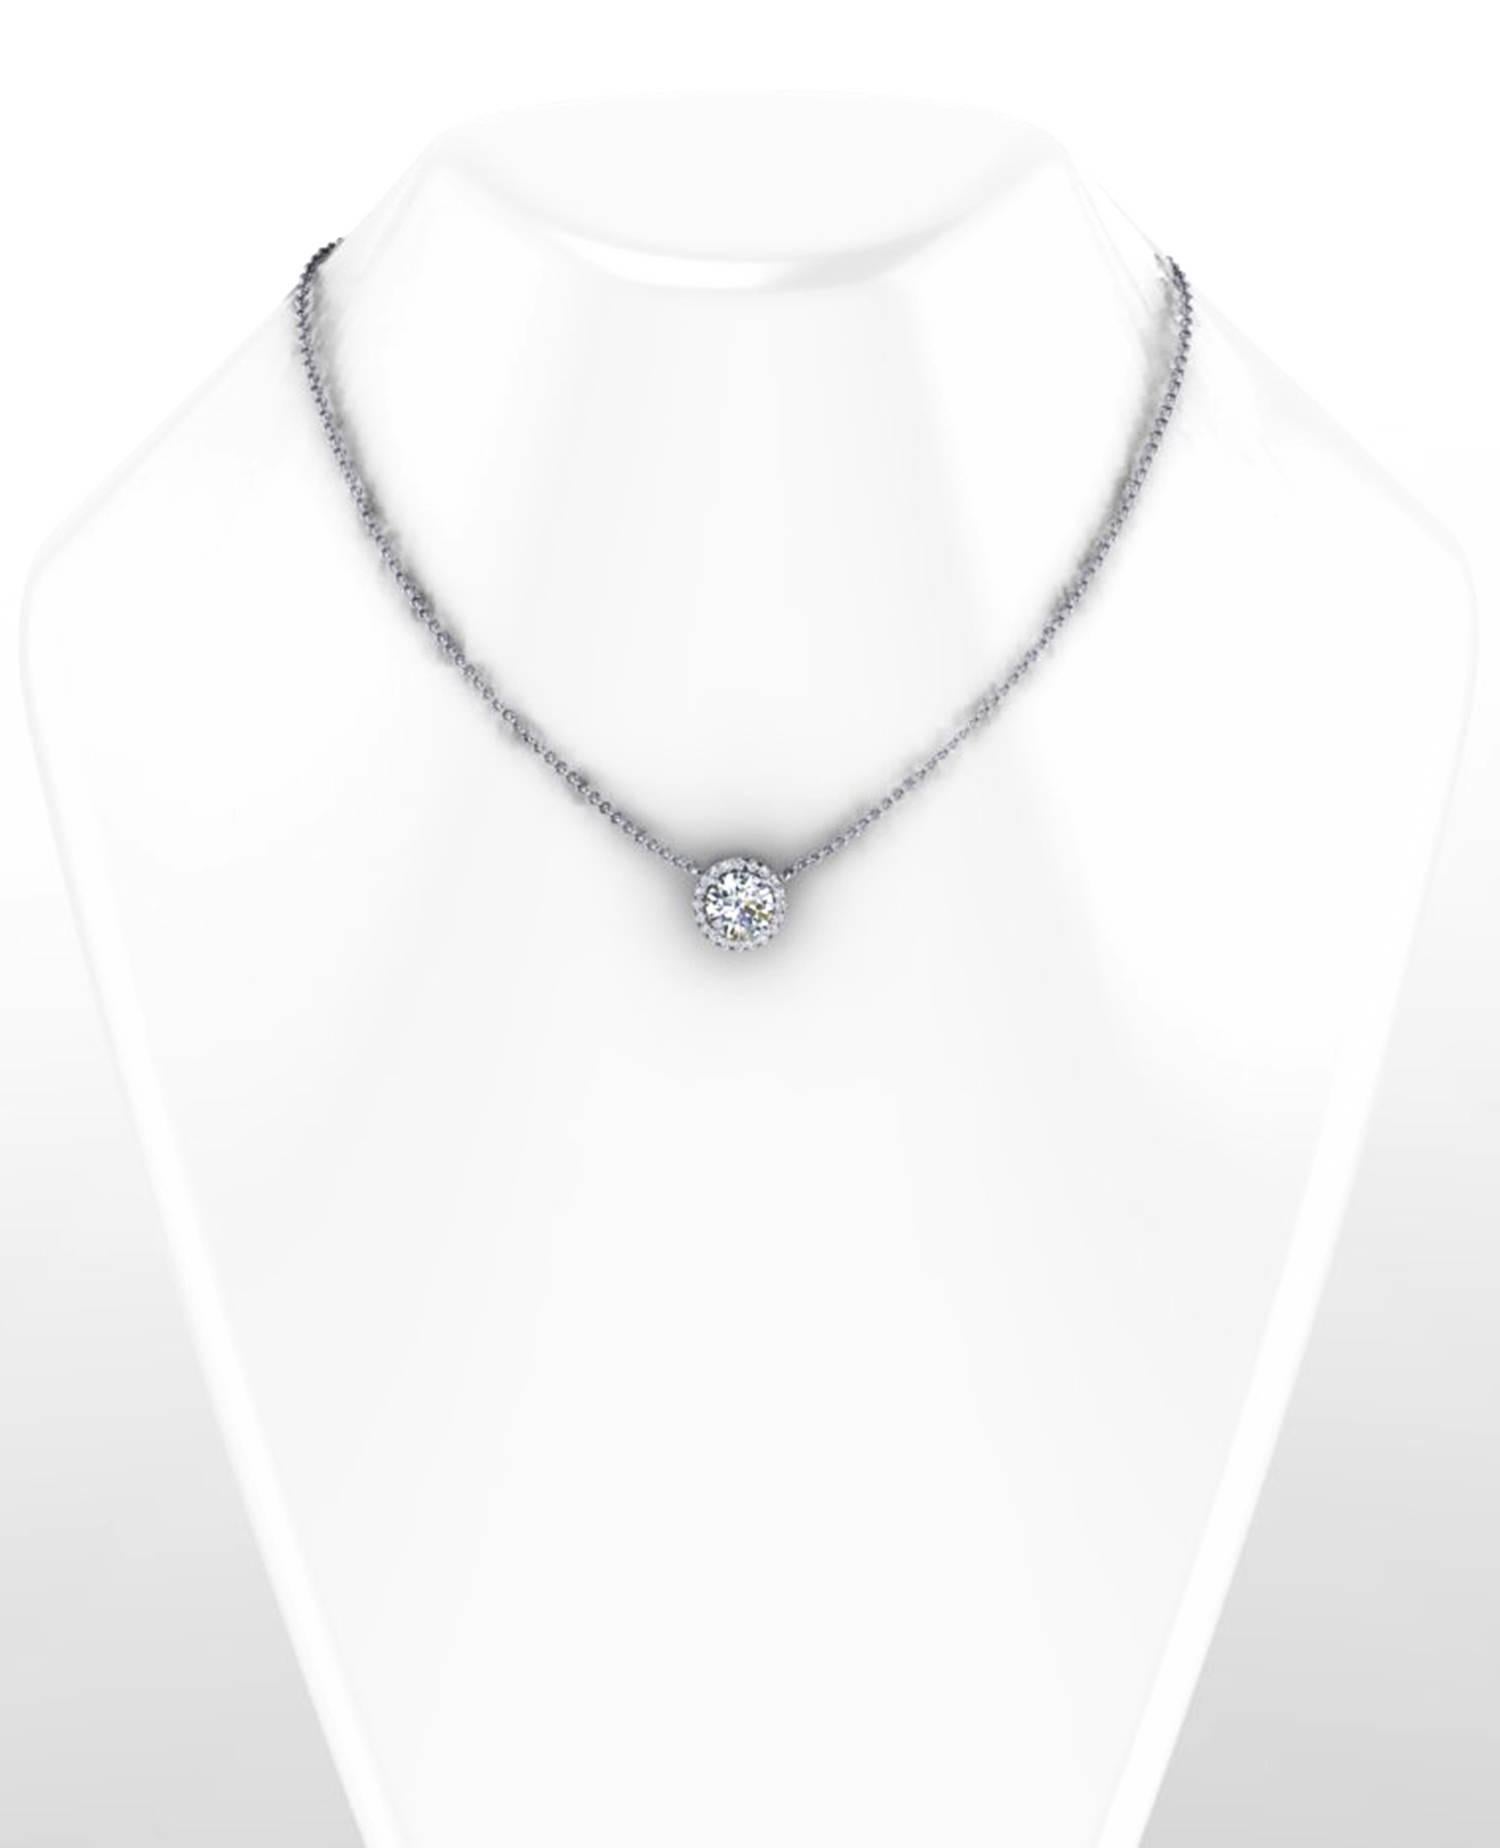 Round Cut 1.06 carats GIA Certified Round Diamond Halo Platinum Pendant Necklace For Sale